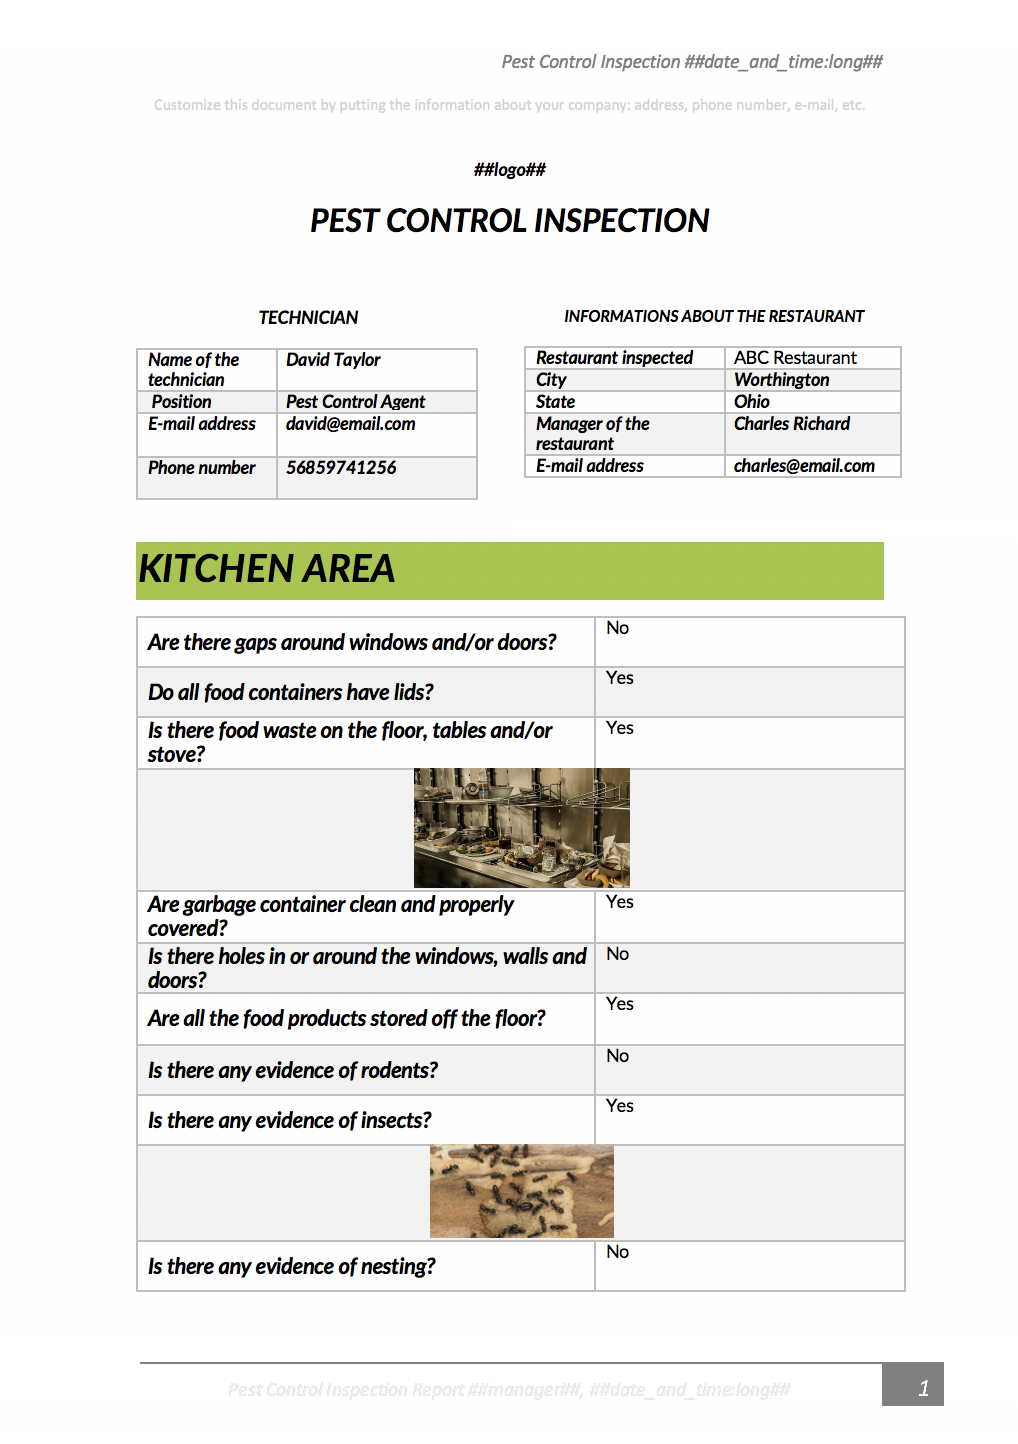 Pest Control Inspection With Kizeo Forms From Your Cellphone Throughout Pest Control Inspection Report Template